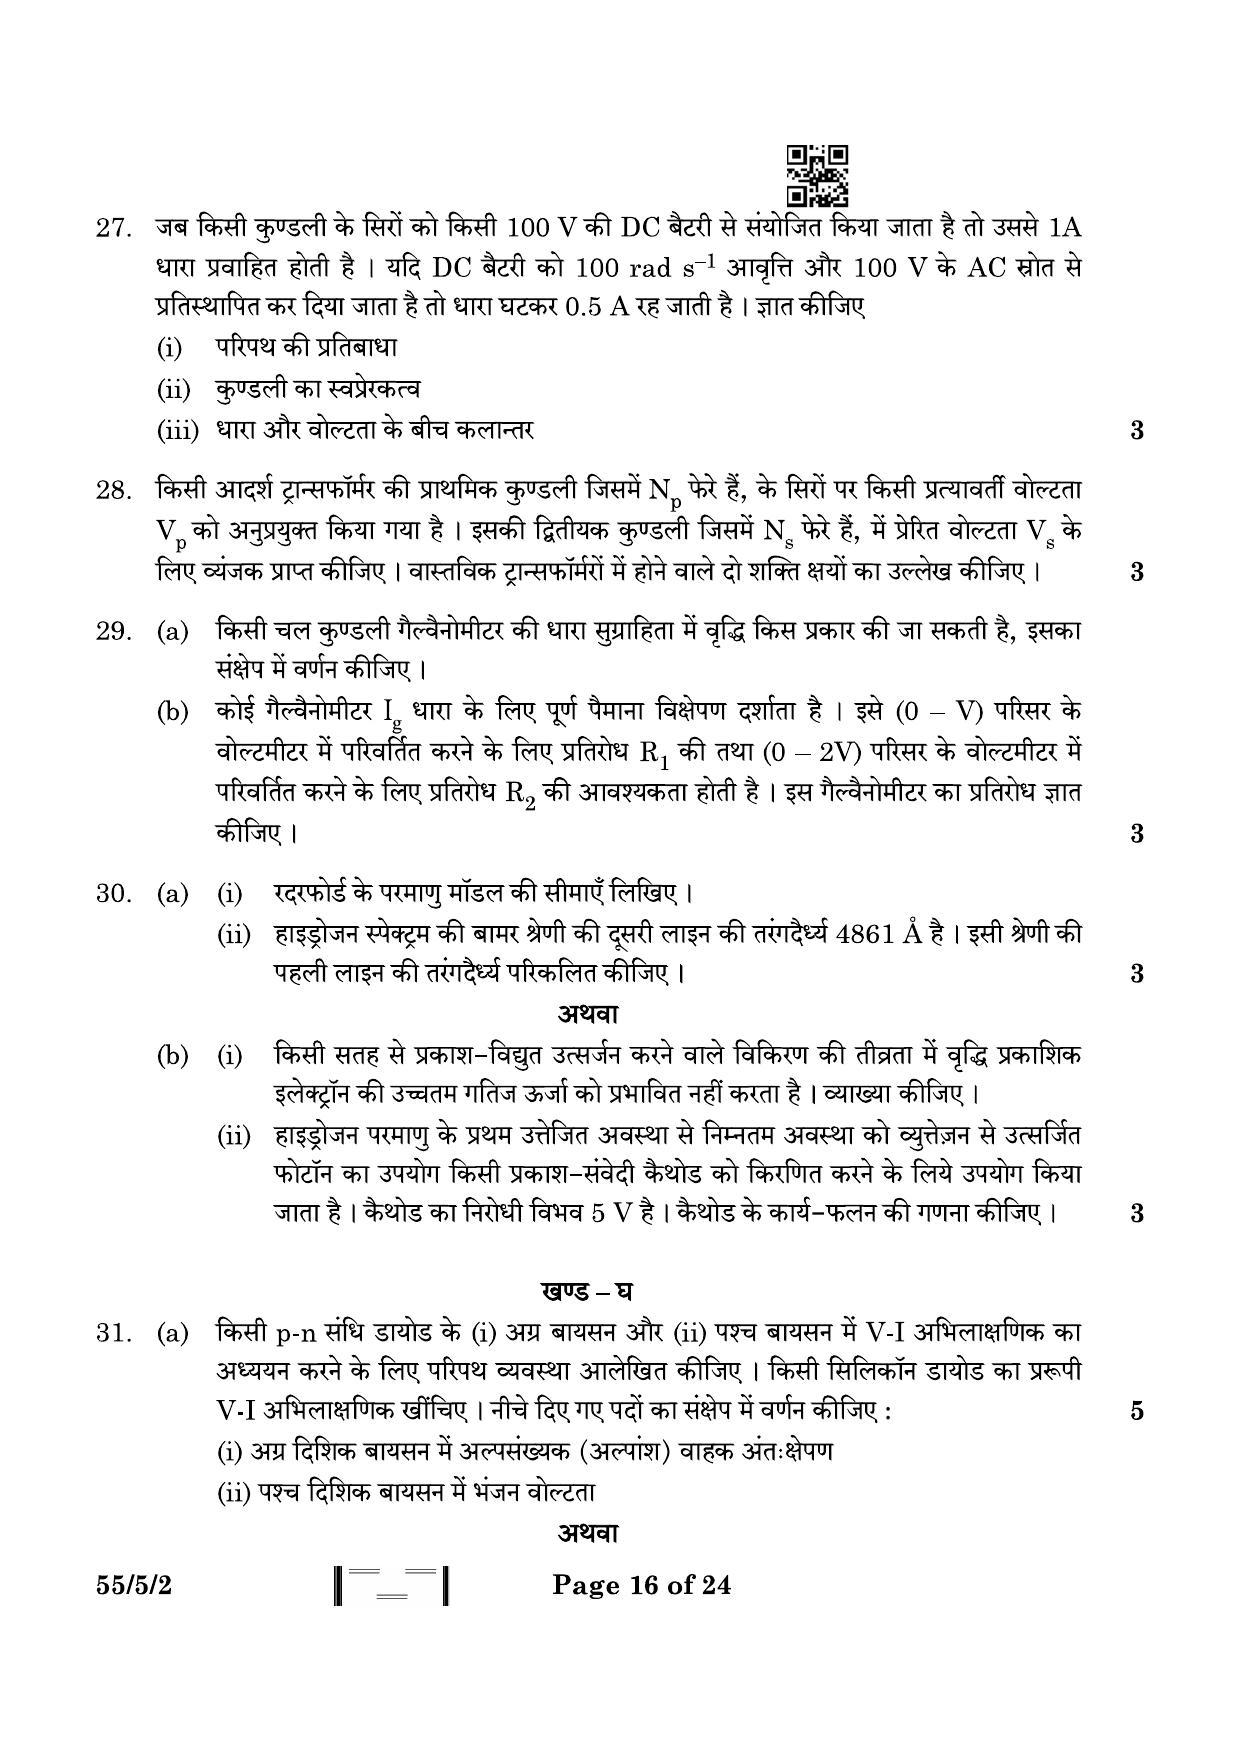 CBSE Class 12 55-5-2 Physics 2023 Question Paper - Page 16